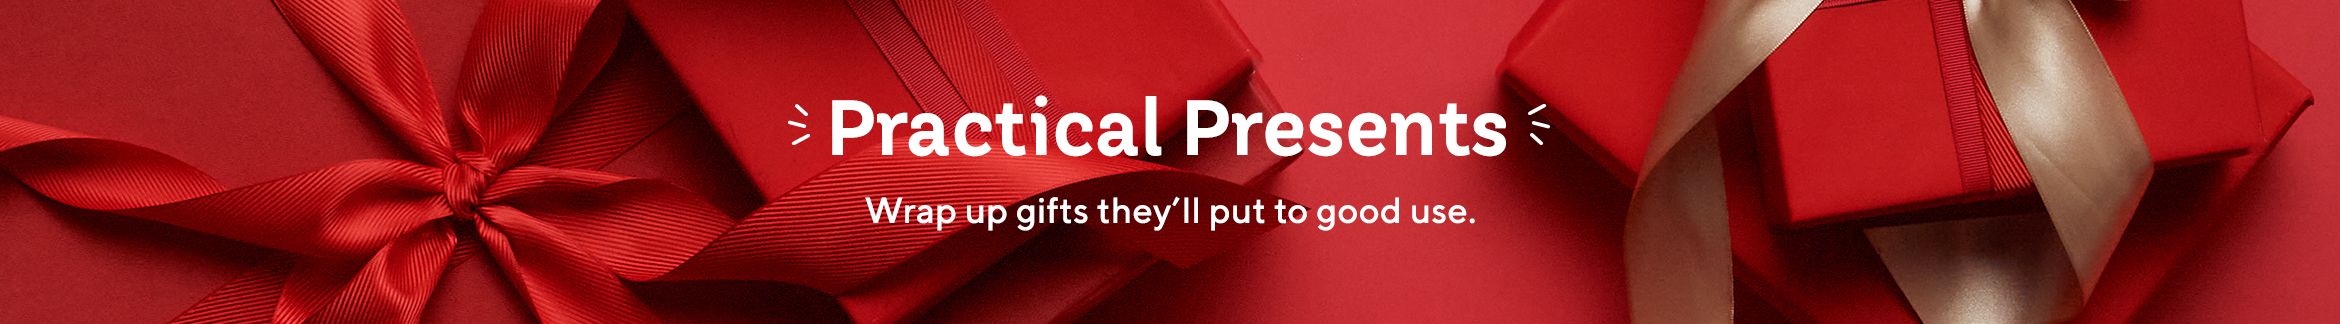 Practical Presents - Wrap up gifts they'll put to good use.